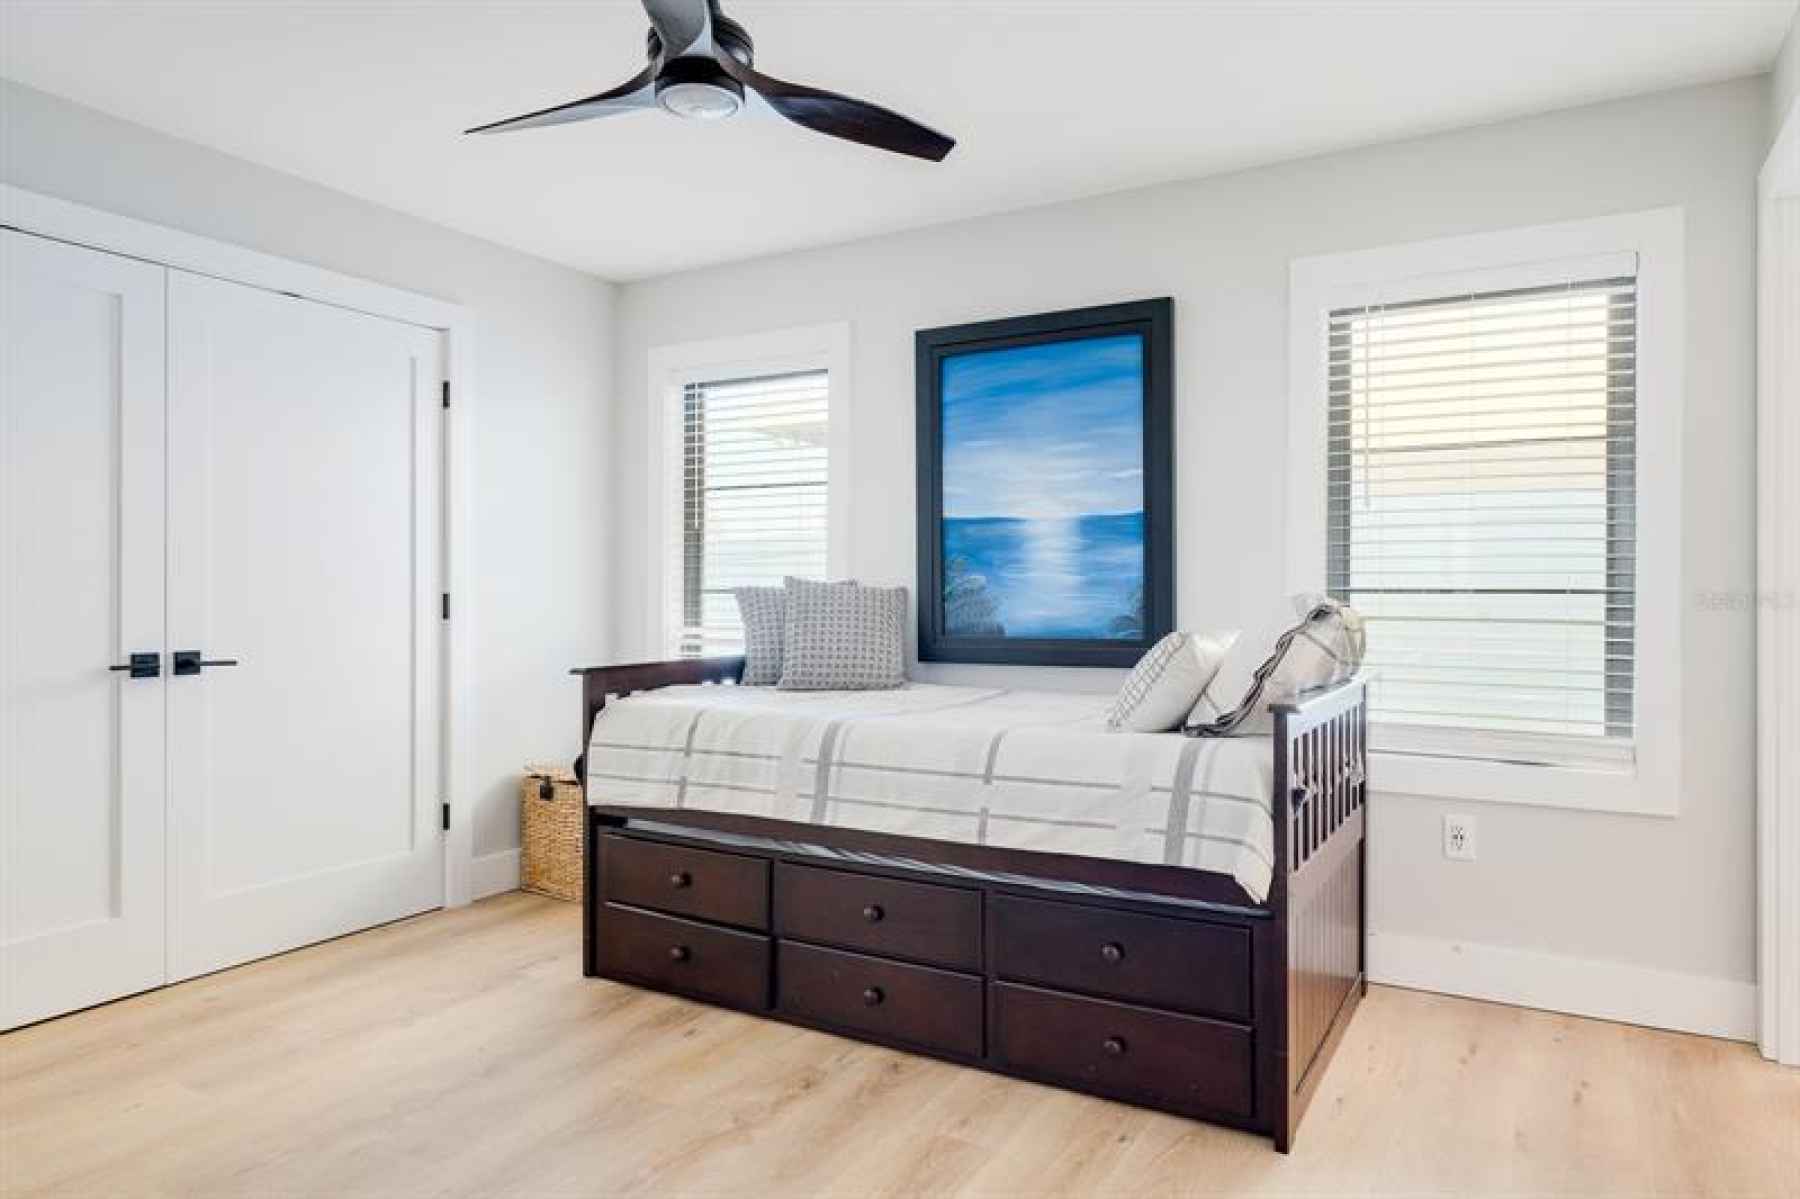 Guest Bedroom with double closets done by California Closets